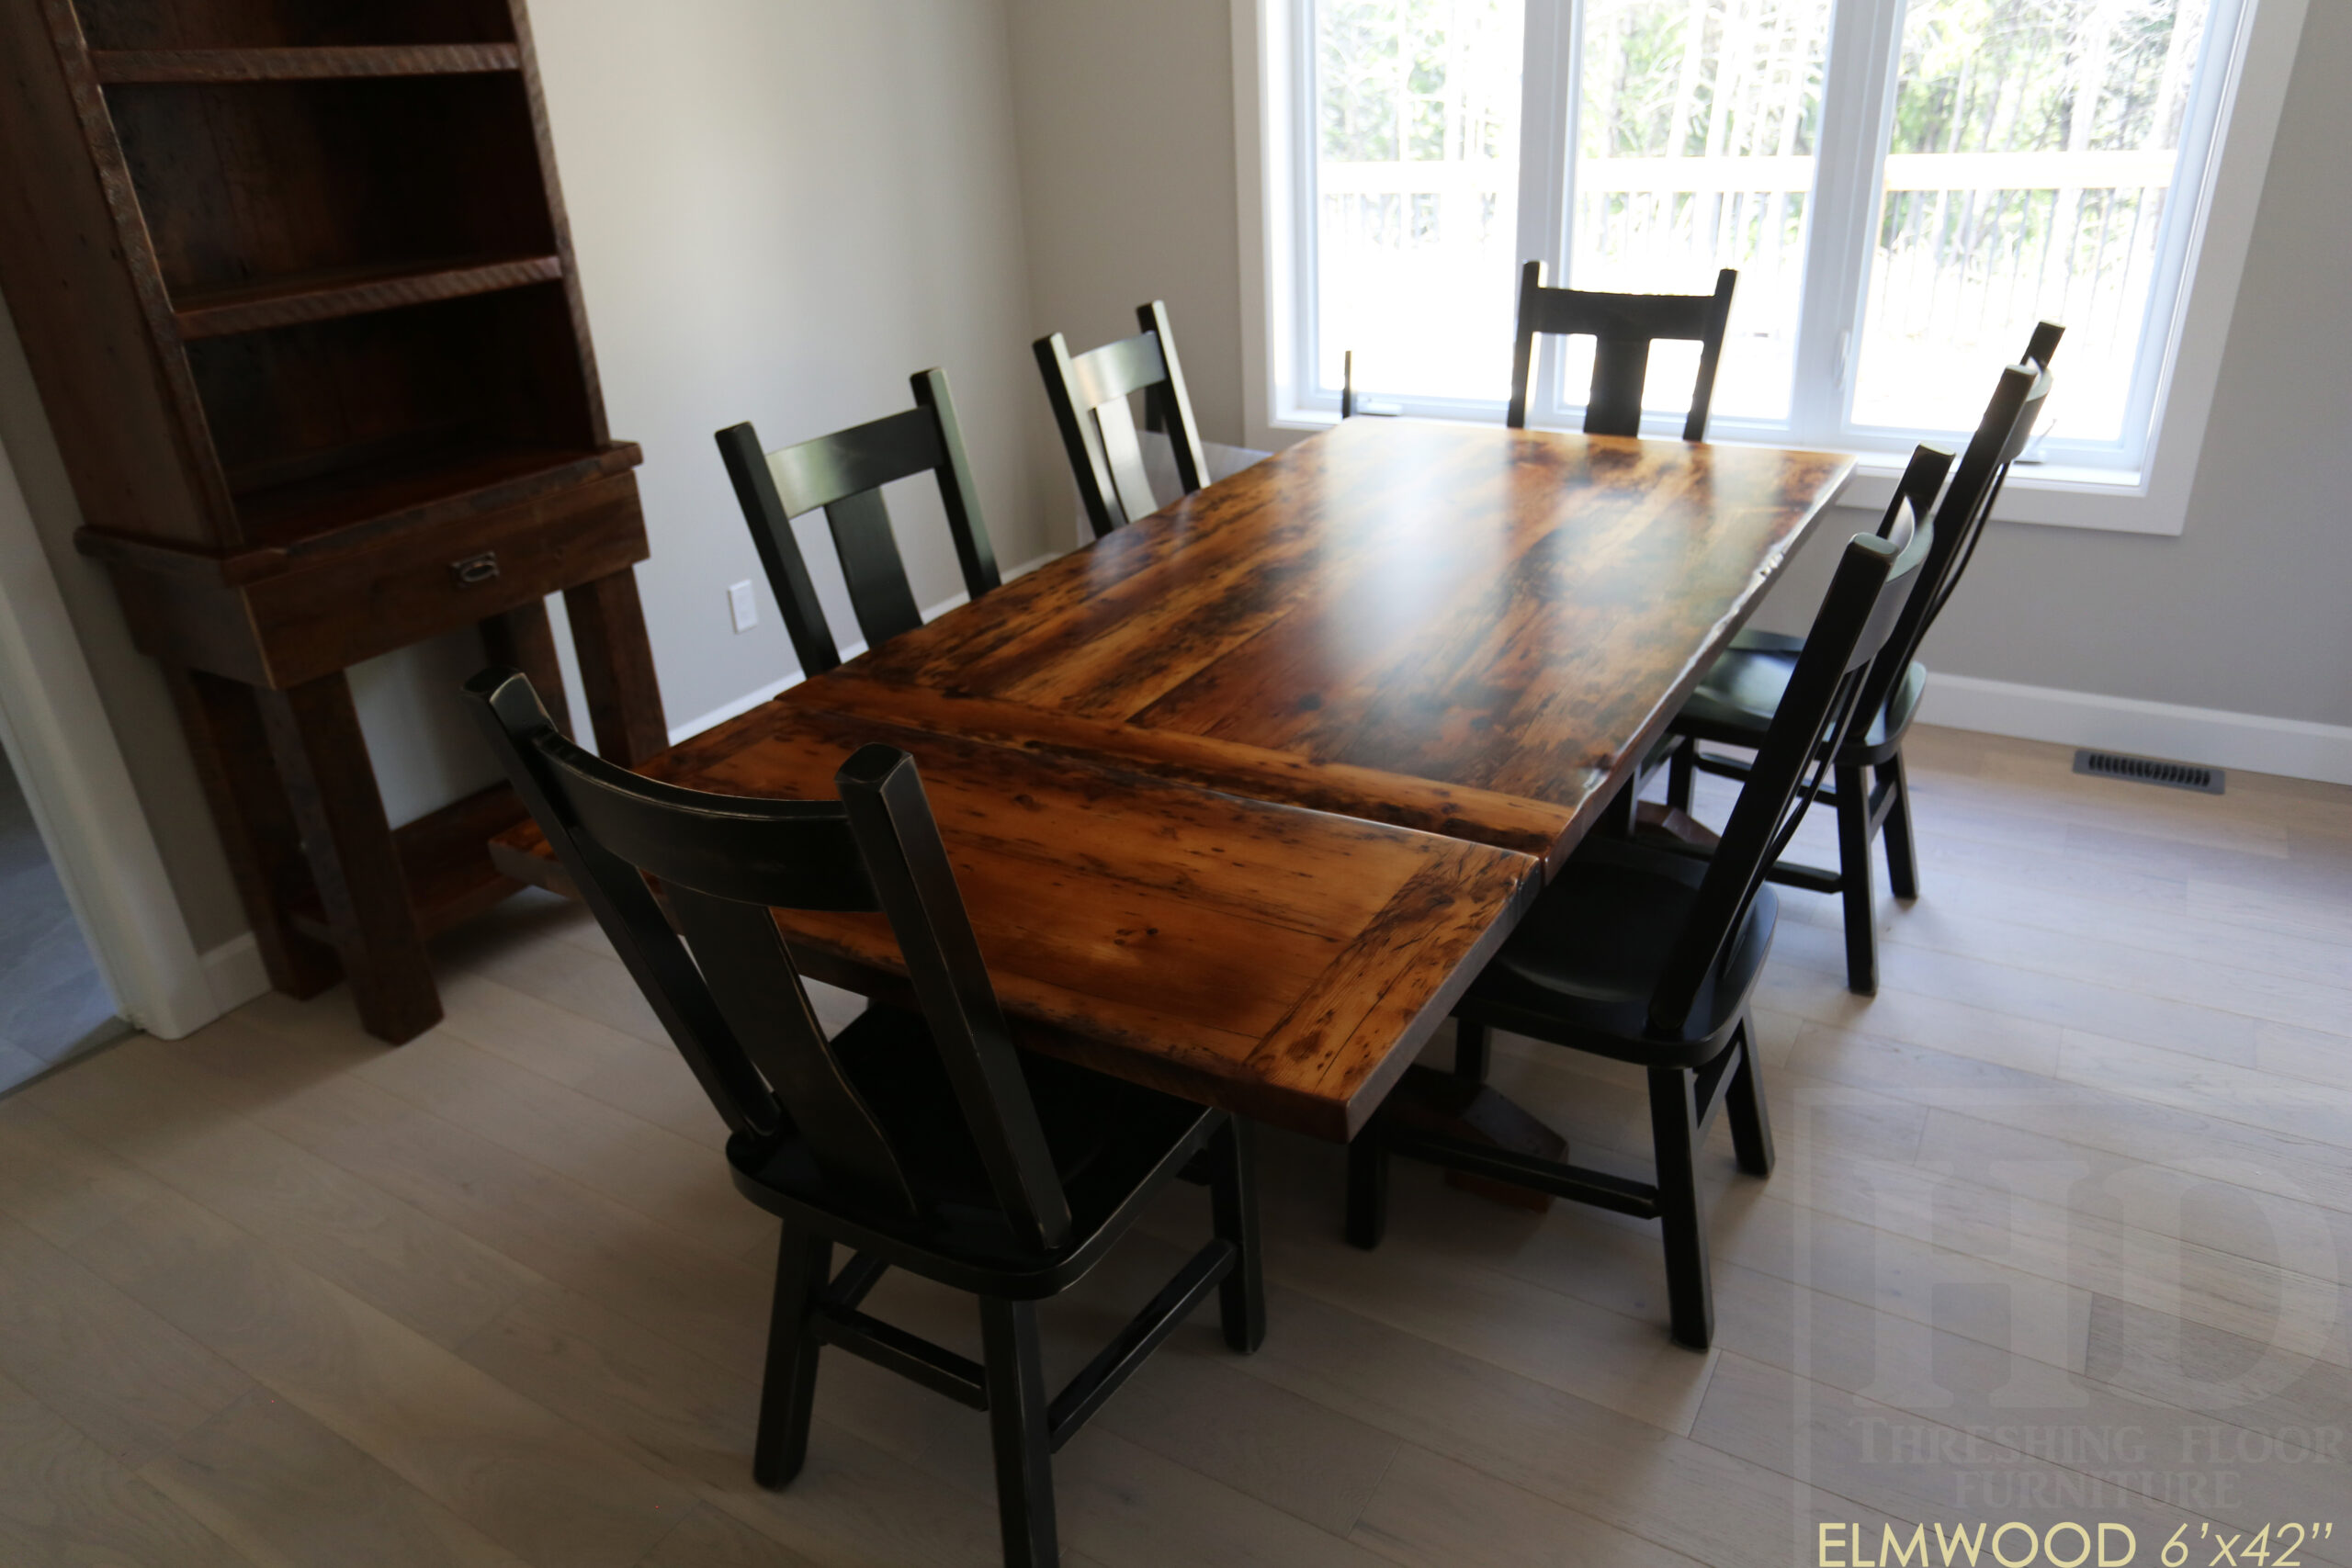 6’ Reclaimed Ontario Barnwood Table we made for an Elmwood, Ontario home – 42” wide – Trestle Base - Old Growth Hemlock Threshing Floor Construction - Original edges & distressing maintained – Bread Edge Board Ends – Premium epoxy + satin polyurethane finish – Two 18” Leaf Extensions – 6 Plank Back Chairs / Wormy Maple / Black with Sandthroughs / Polyurethane Clearcoat Finish - www.table.ca